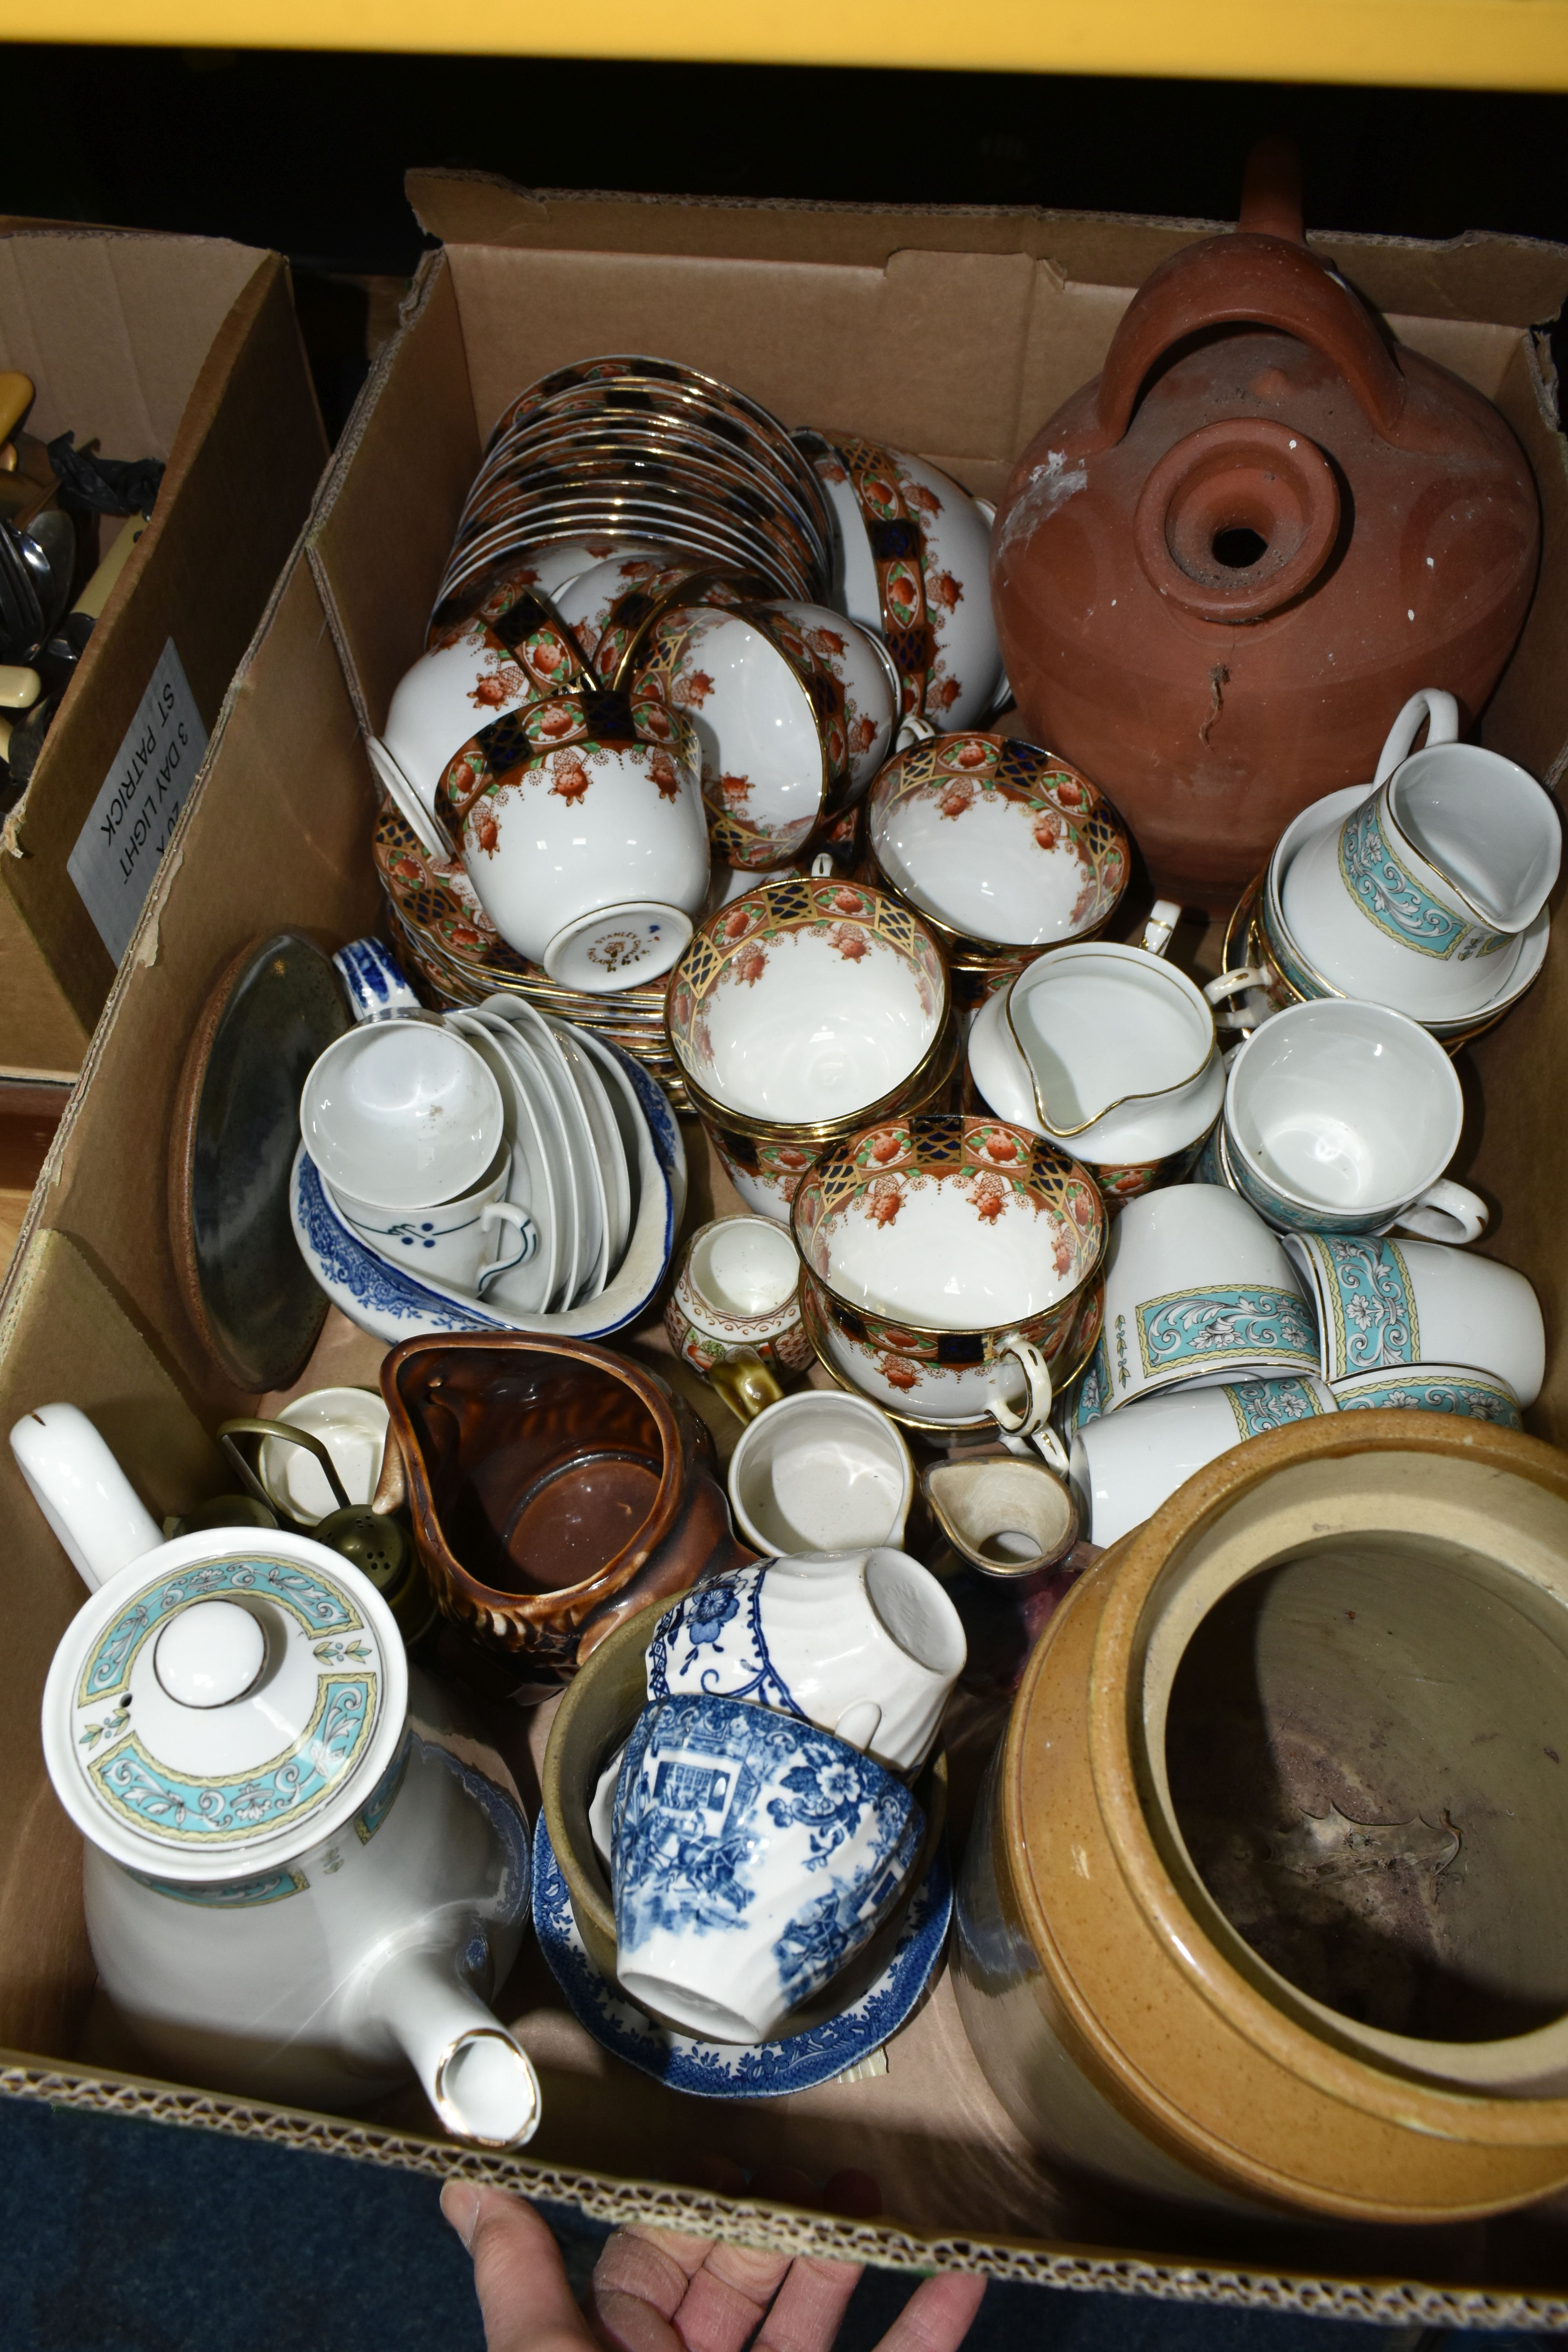 FIVE BOXES AND LOOSE CERAMICS, GLASS, CUTLERY AND KITCHEN WARE, to include a Moulinex food processor - Image 2 of 7